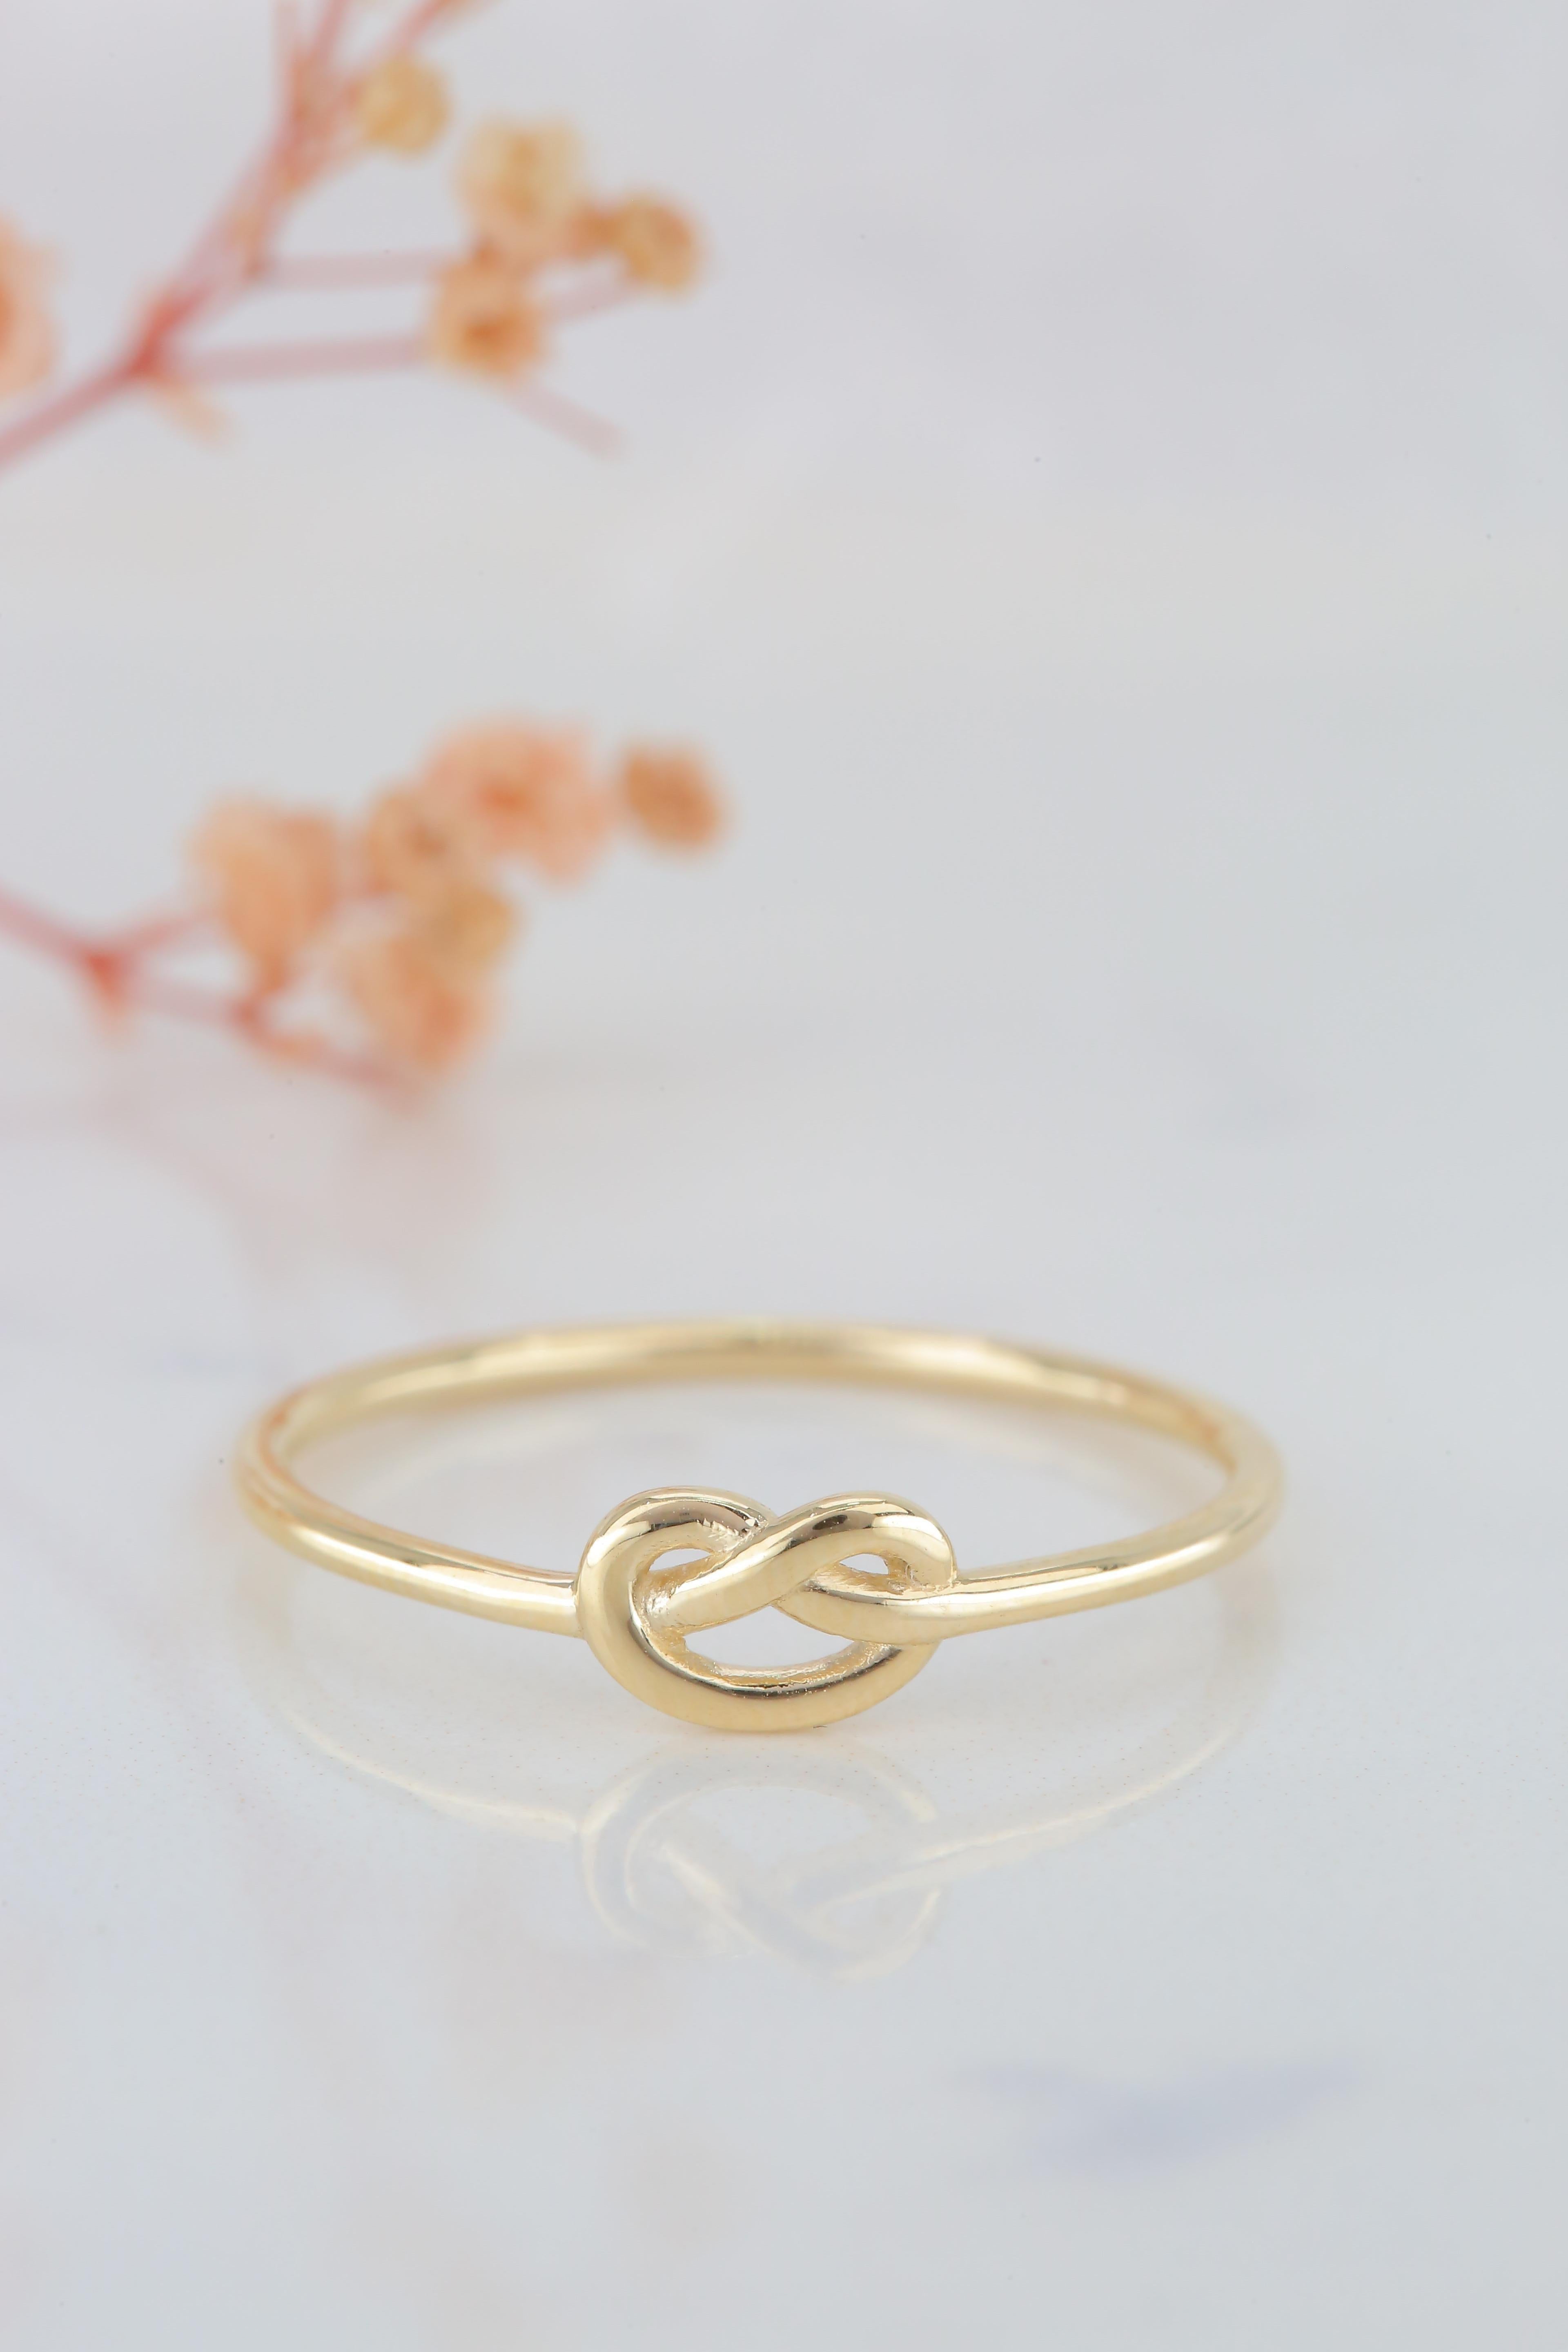 For Sale:  Gold Knot Ring, 14k Solid Gold, Dainty Ring, Minimalist Style Ring 4